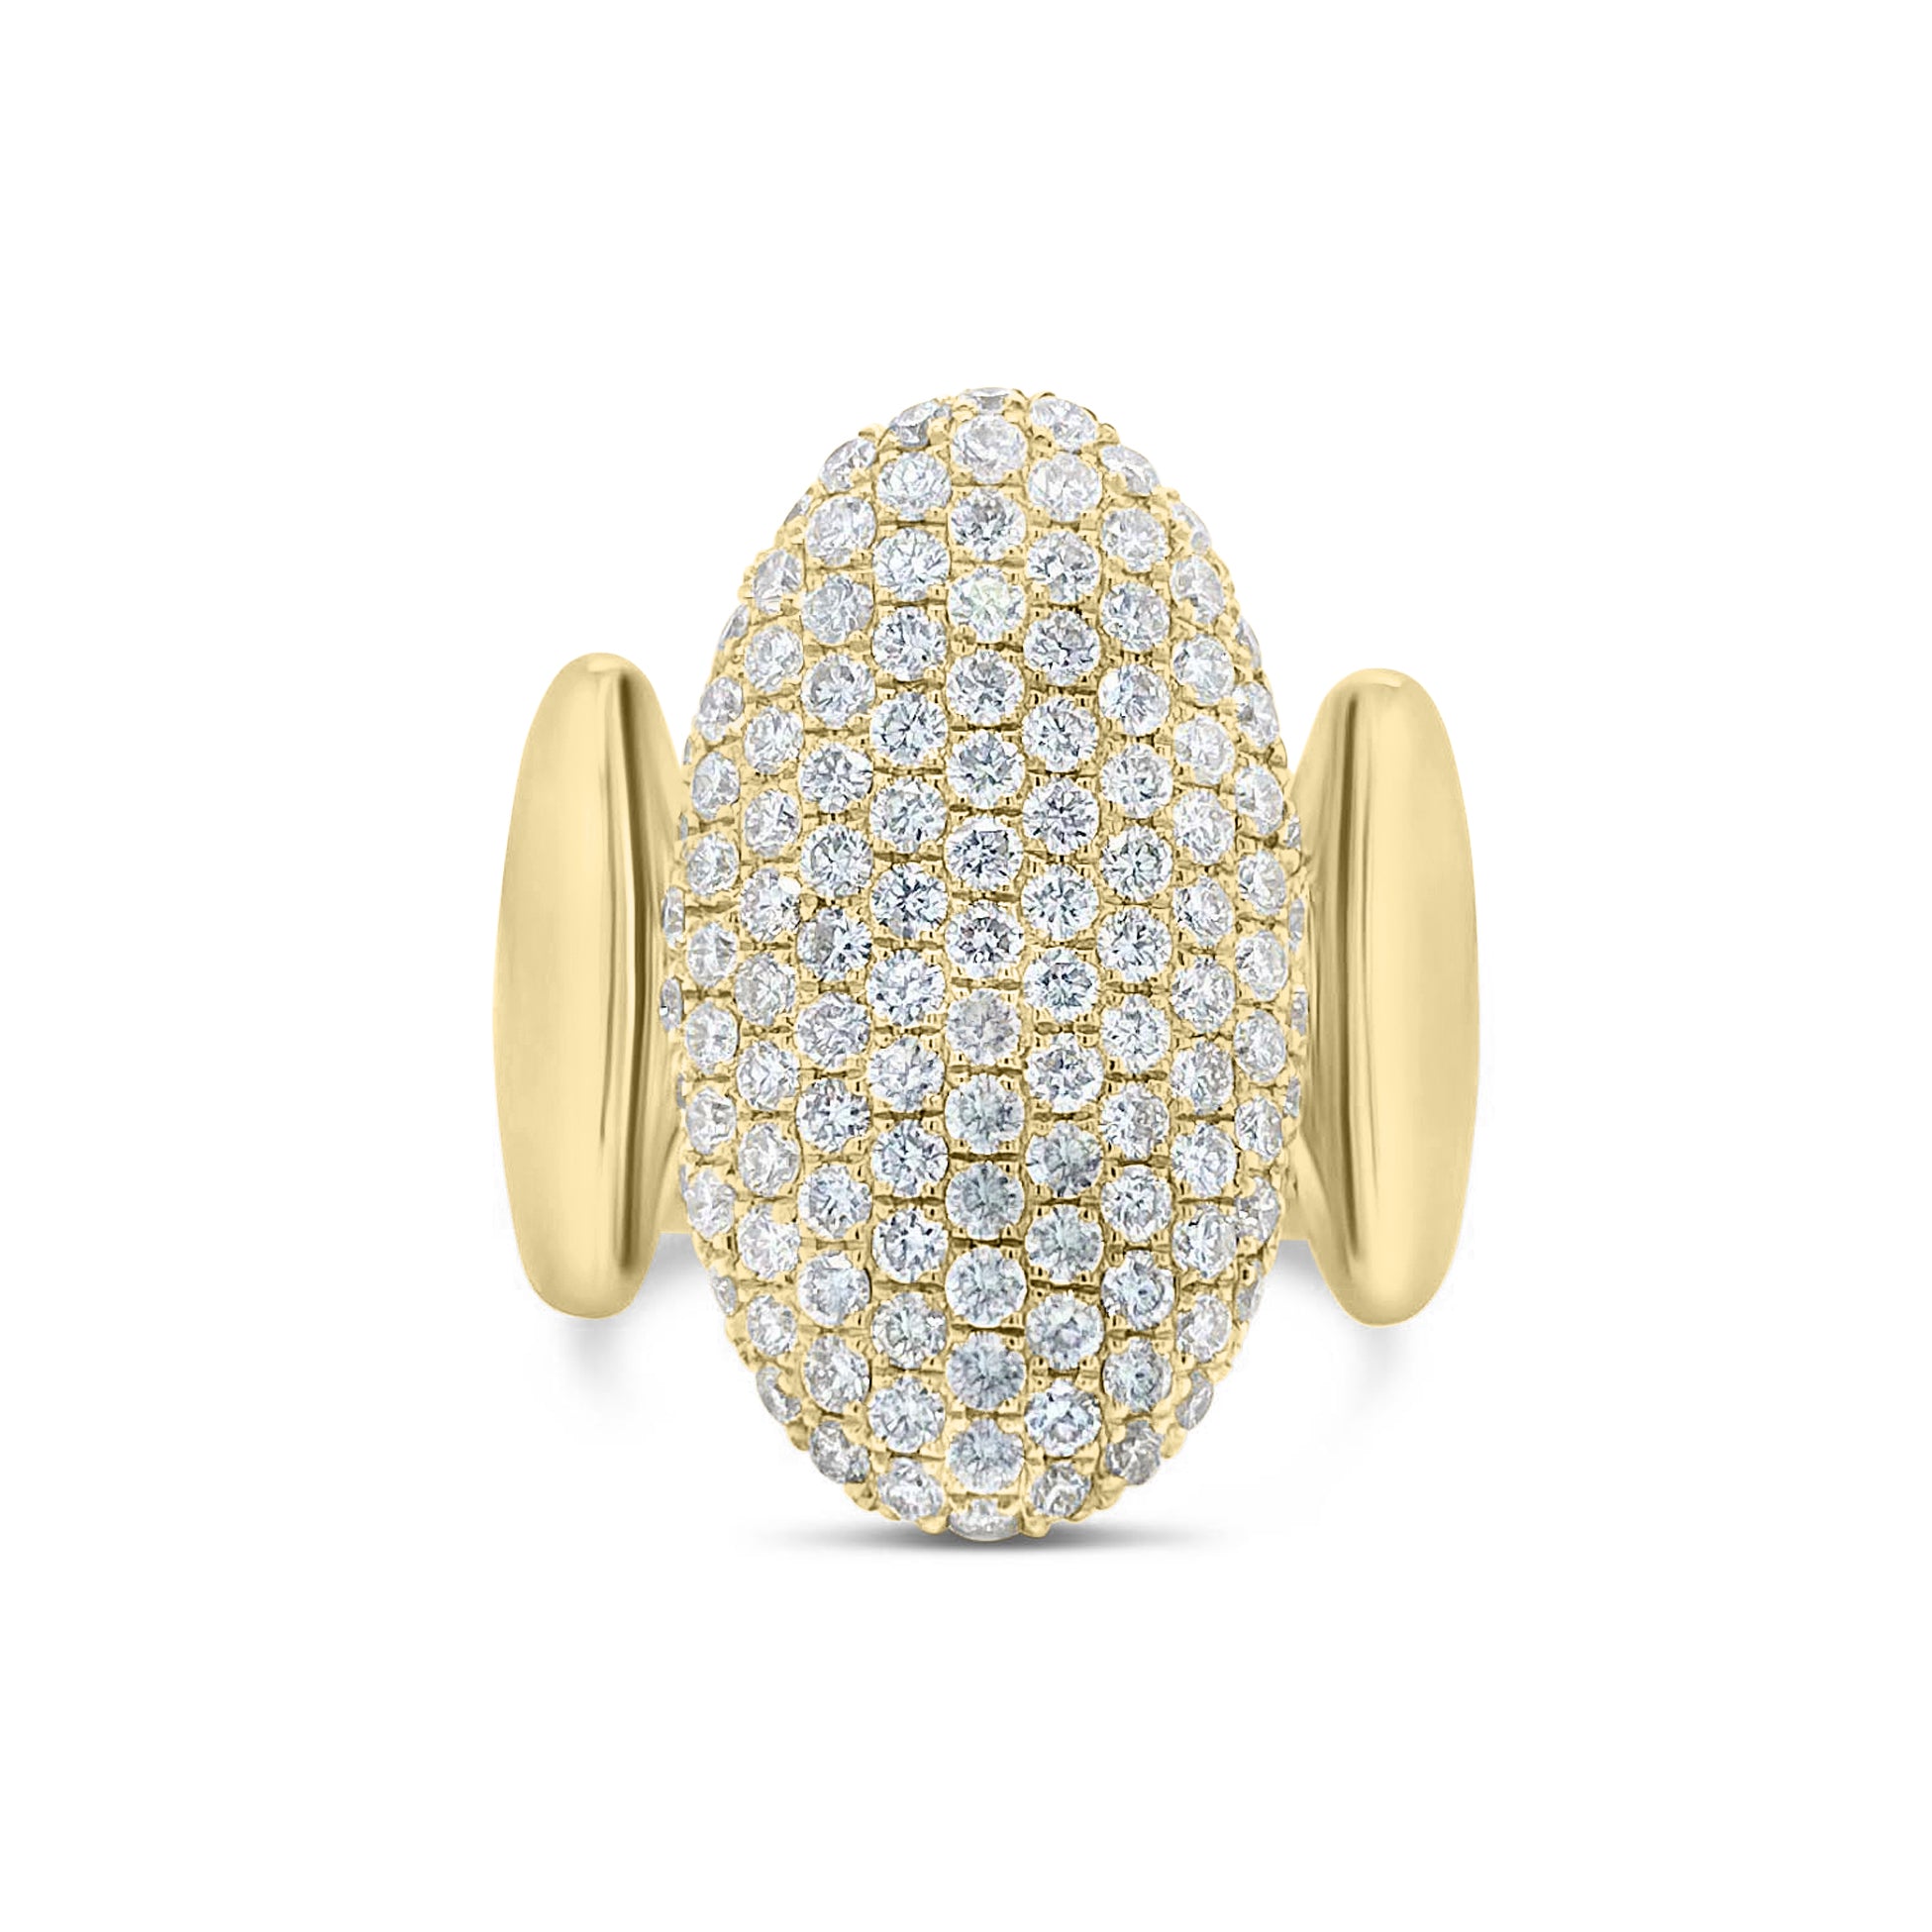 Pave Diamond Ovals Statement Ring  - 14K gold weighing 7.88 grams  - 123 round diamonds totaling 1.78 carats